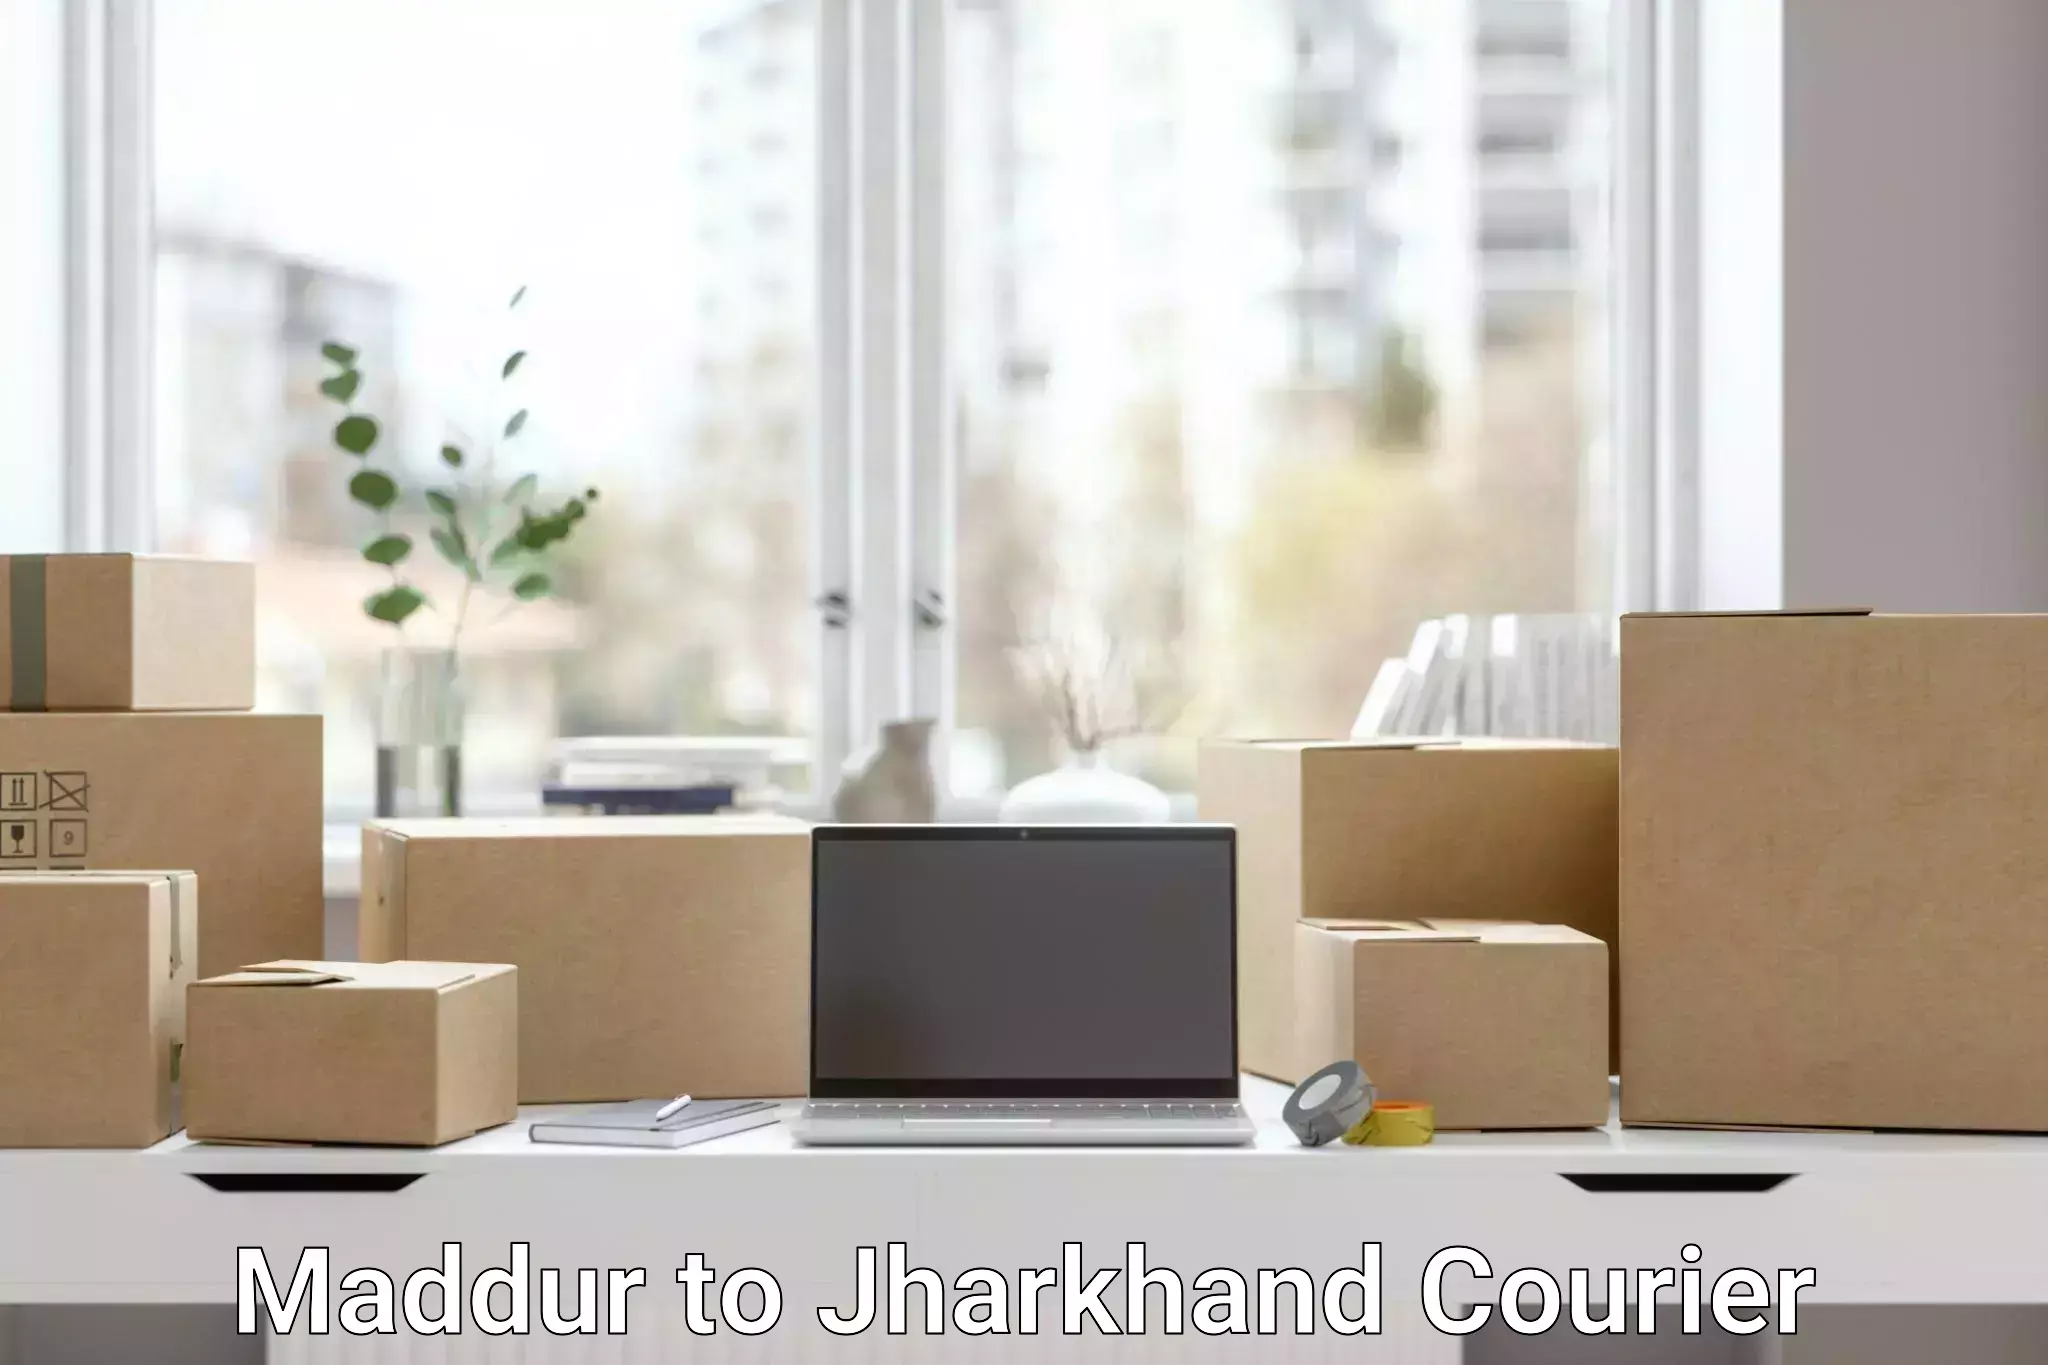 Full-service courier options Maddur to Jharkhand